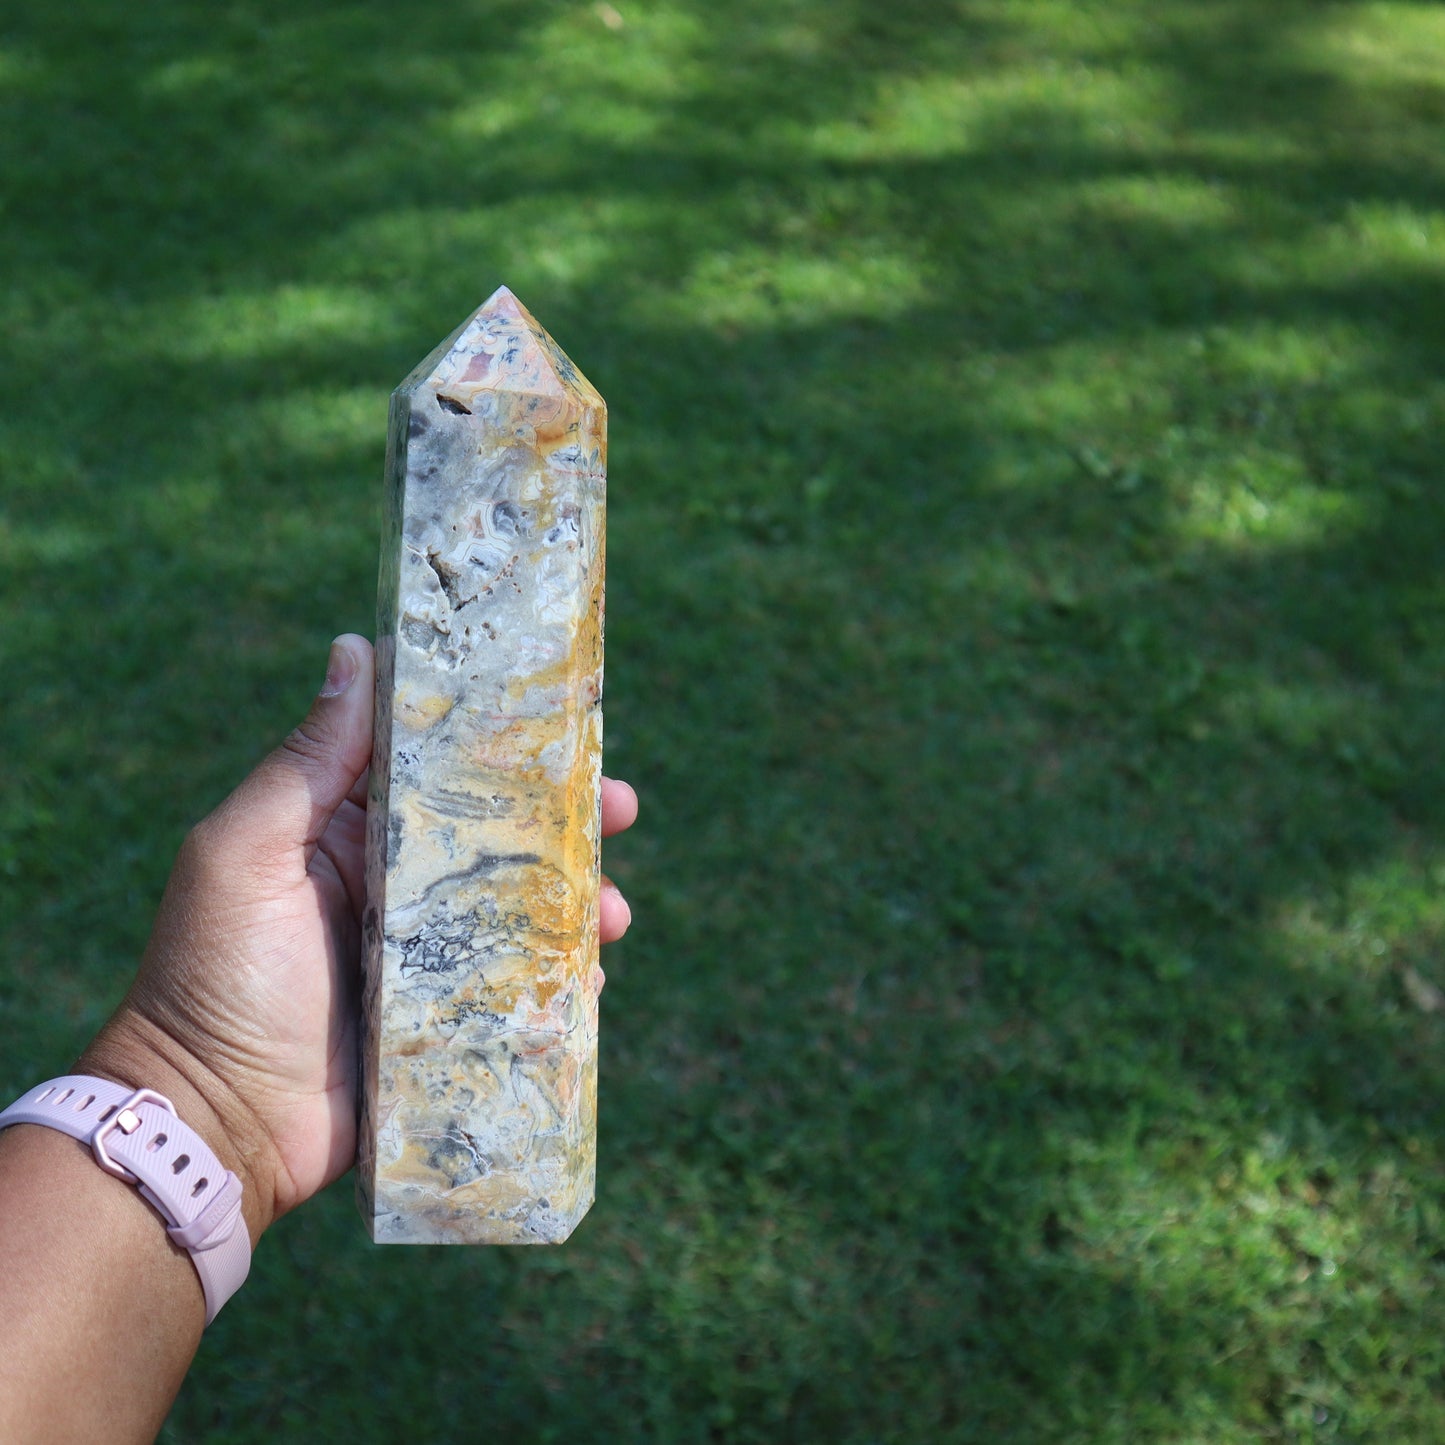 Crazy Lace Agate Tower, Big Agate Tower, Crystal Collection, Large Crystal Tower, 9in Crazy Lace Agate Tower Moss Agate Wand, Natural Agate